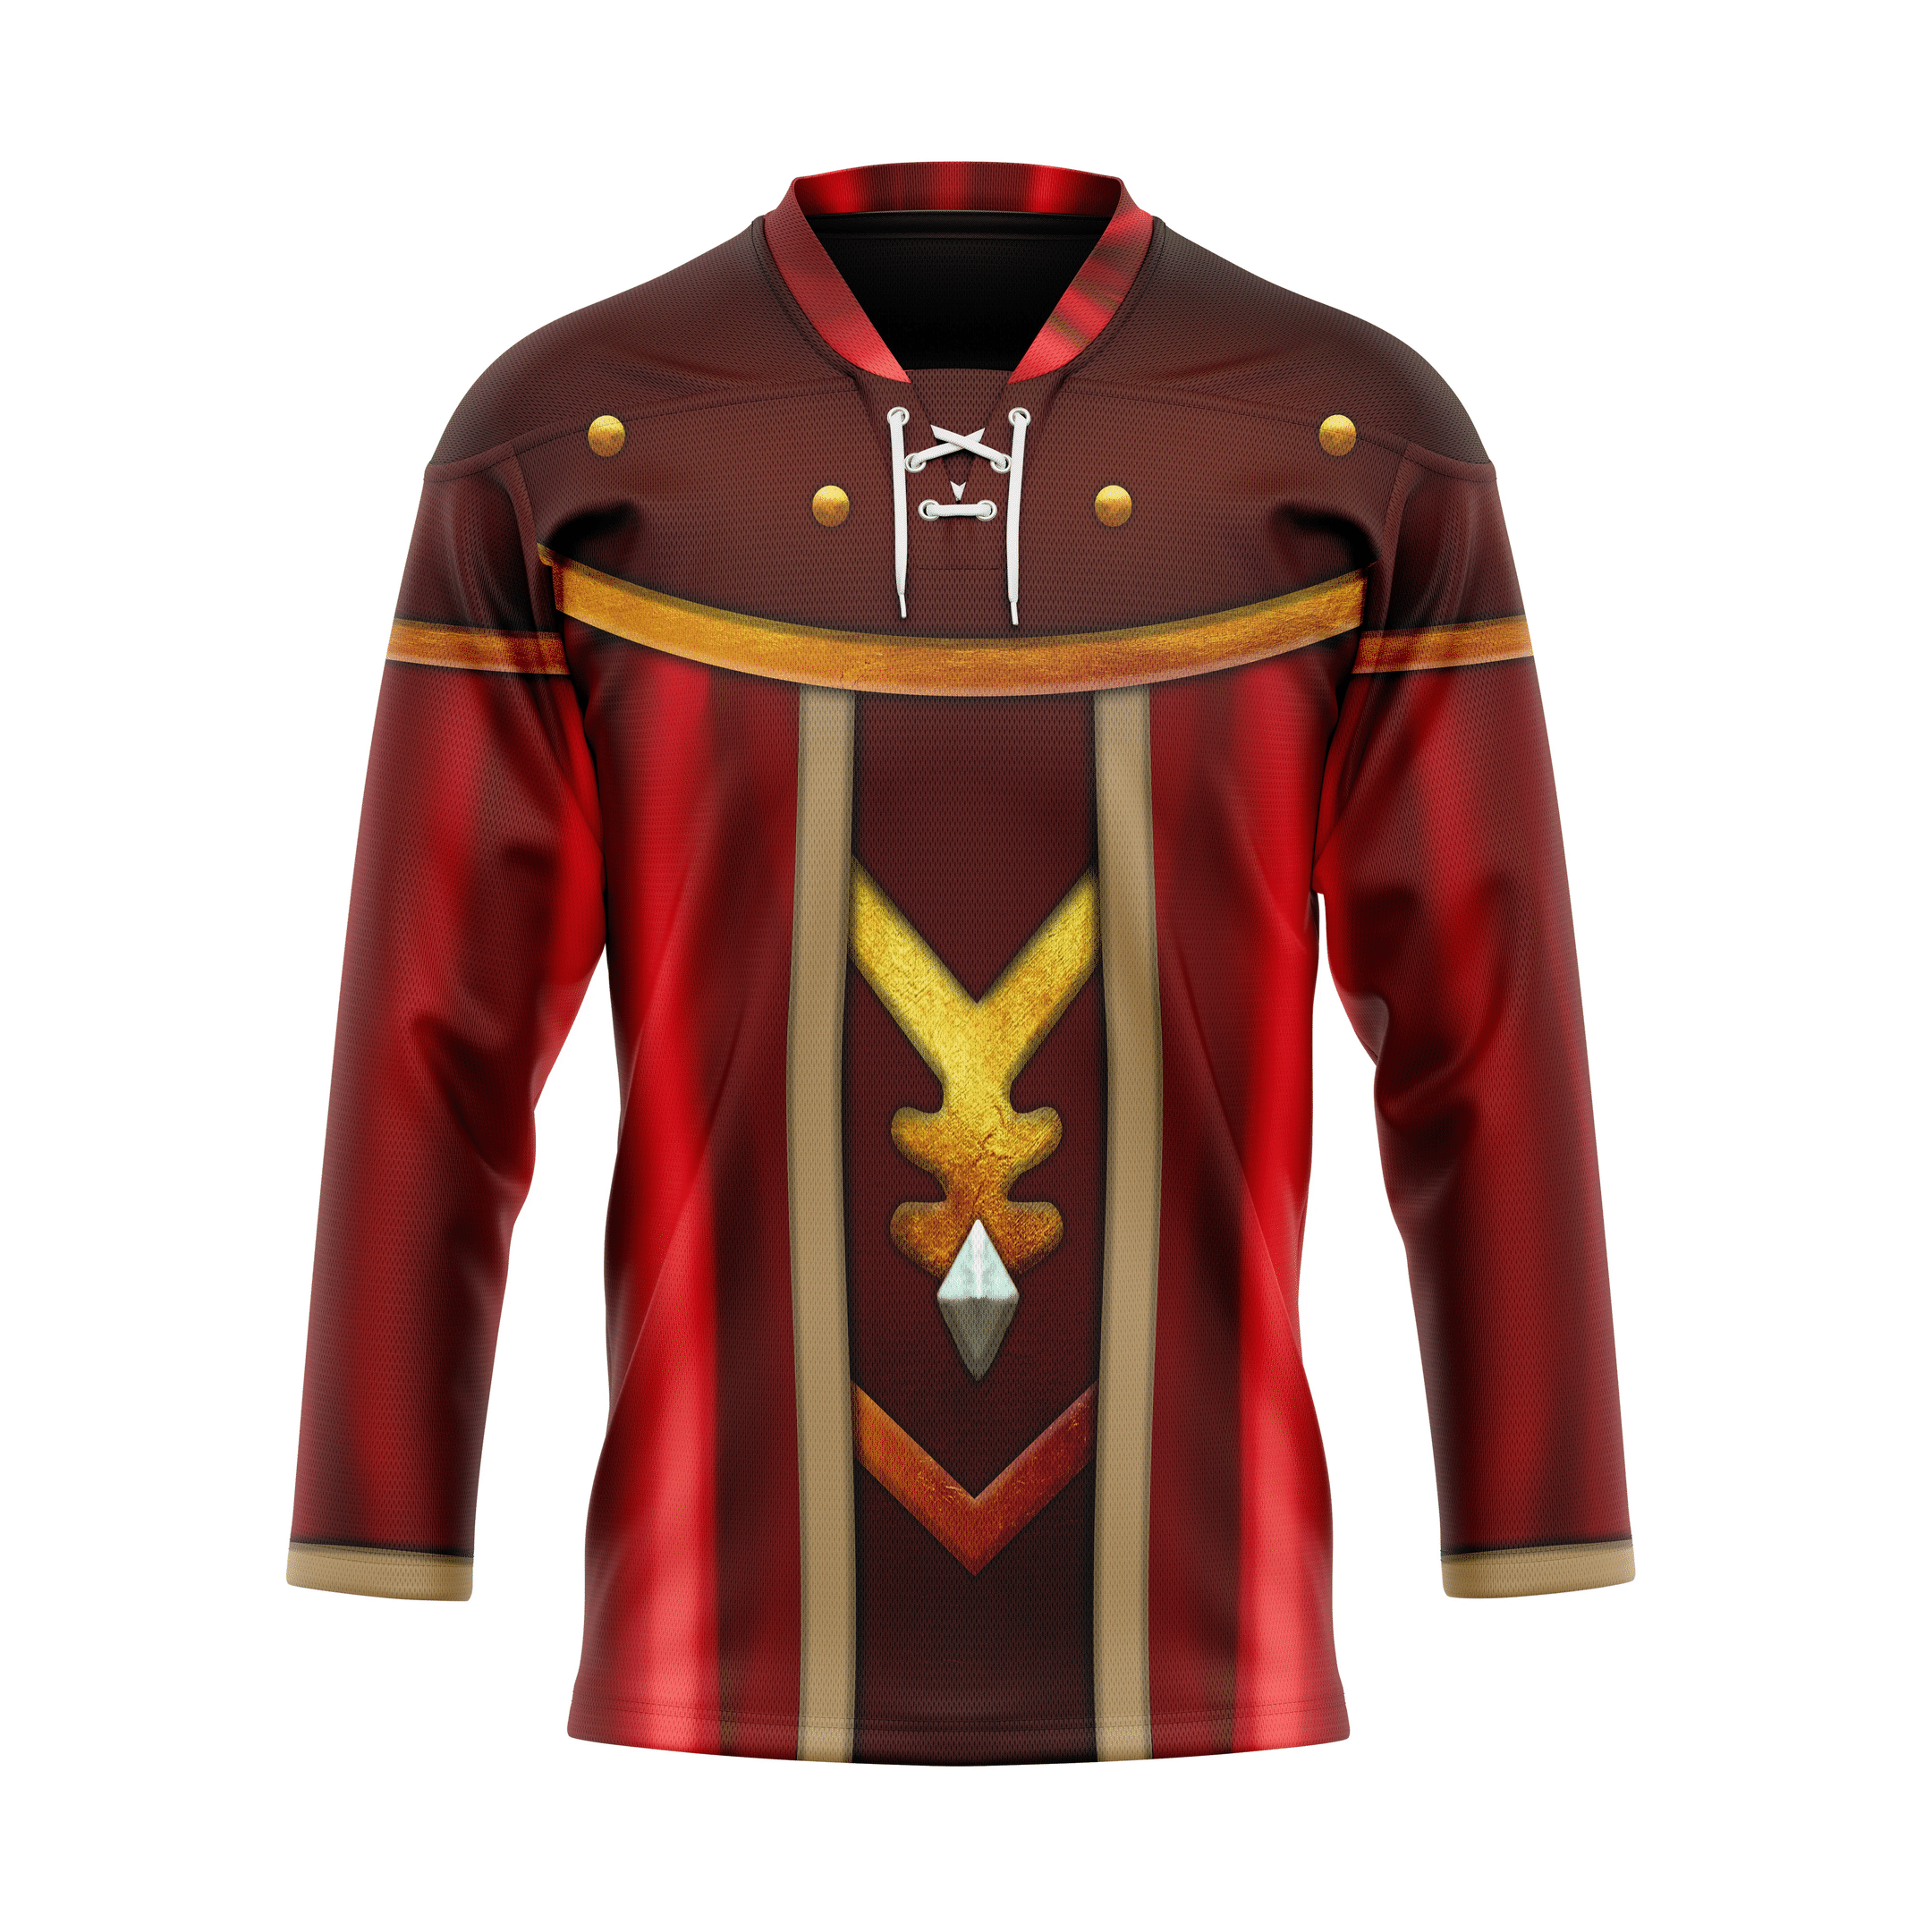 Top cool Hockey jersey for fan You can buy online. 64